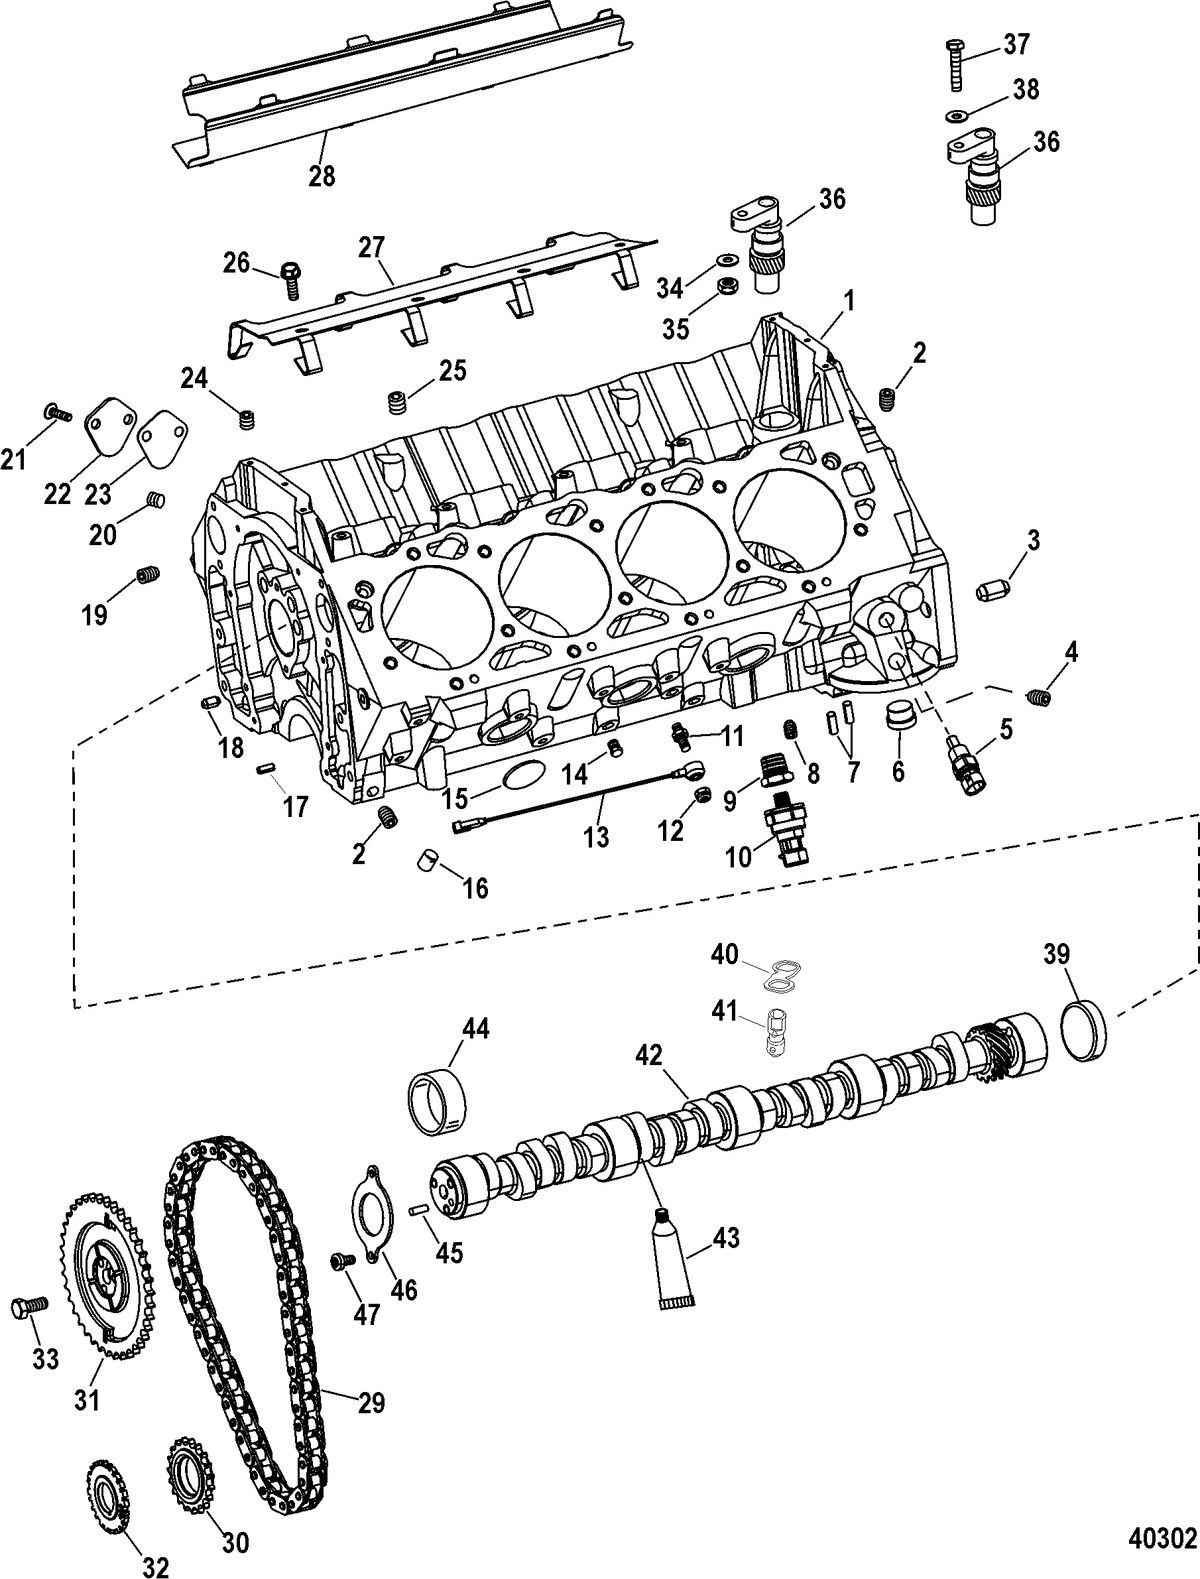 RACE STERNDRIVE 600 SCI Engine Components(Cylinder Block And Camshaft)